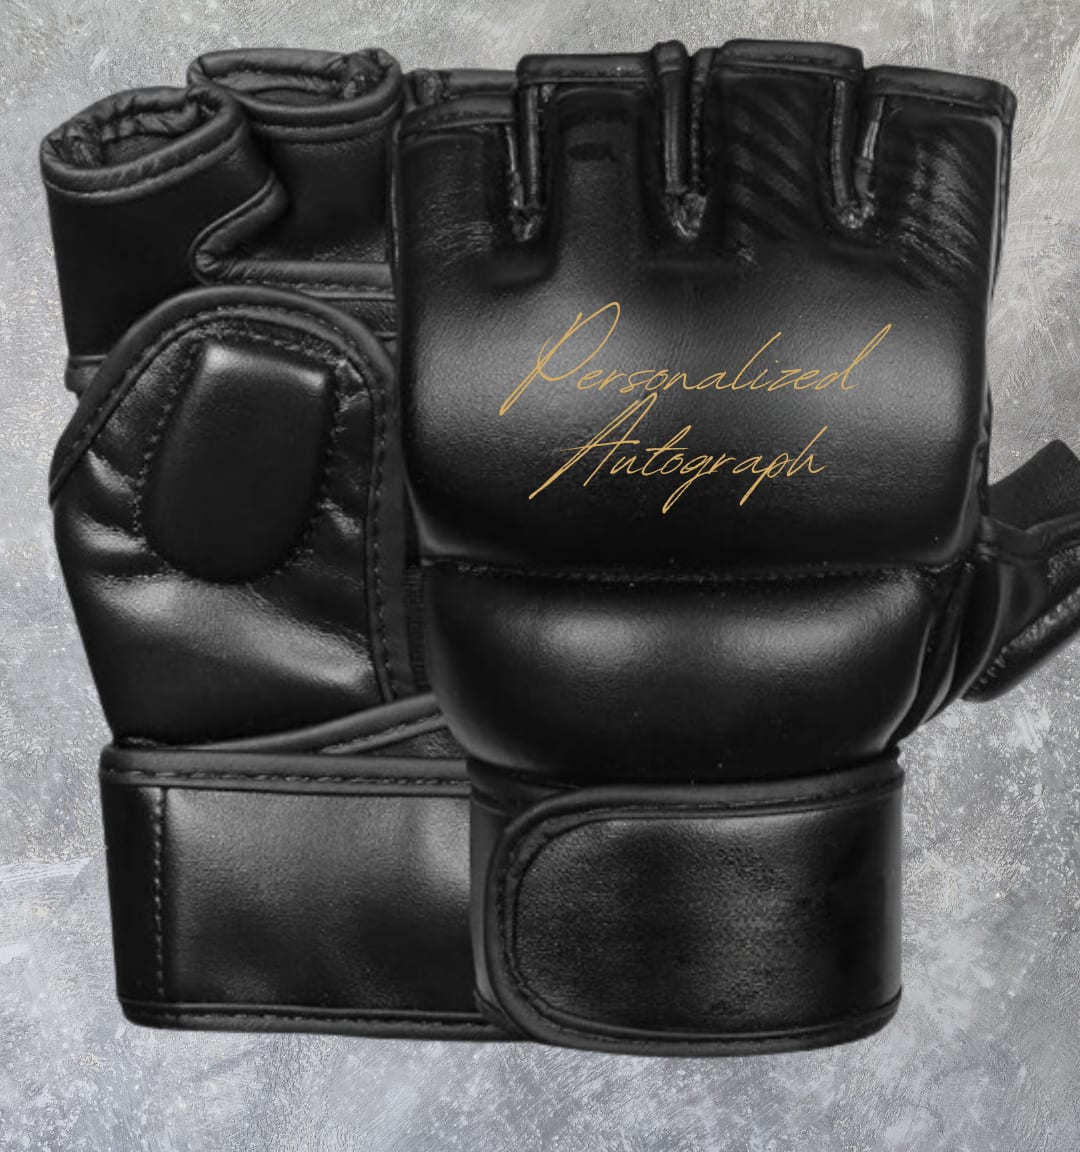 Limited Edition Andy Nguyen Autographed MMA Gloves